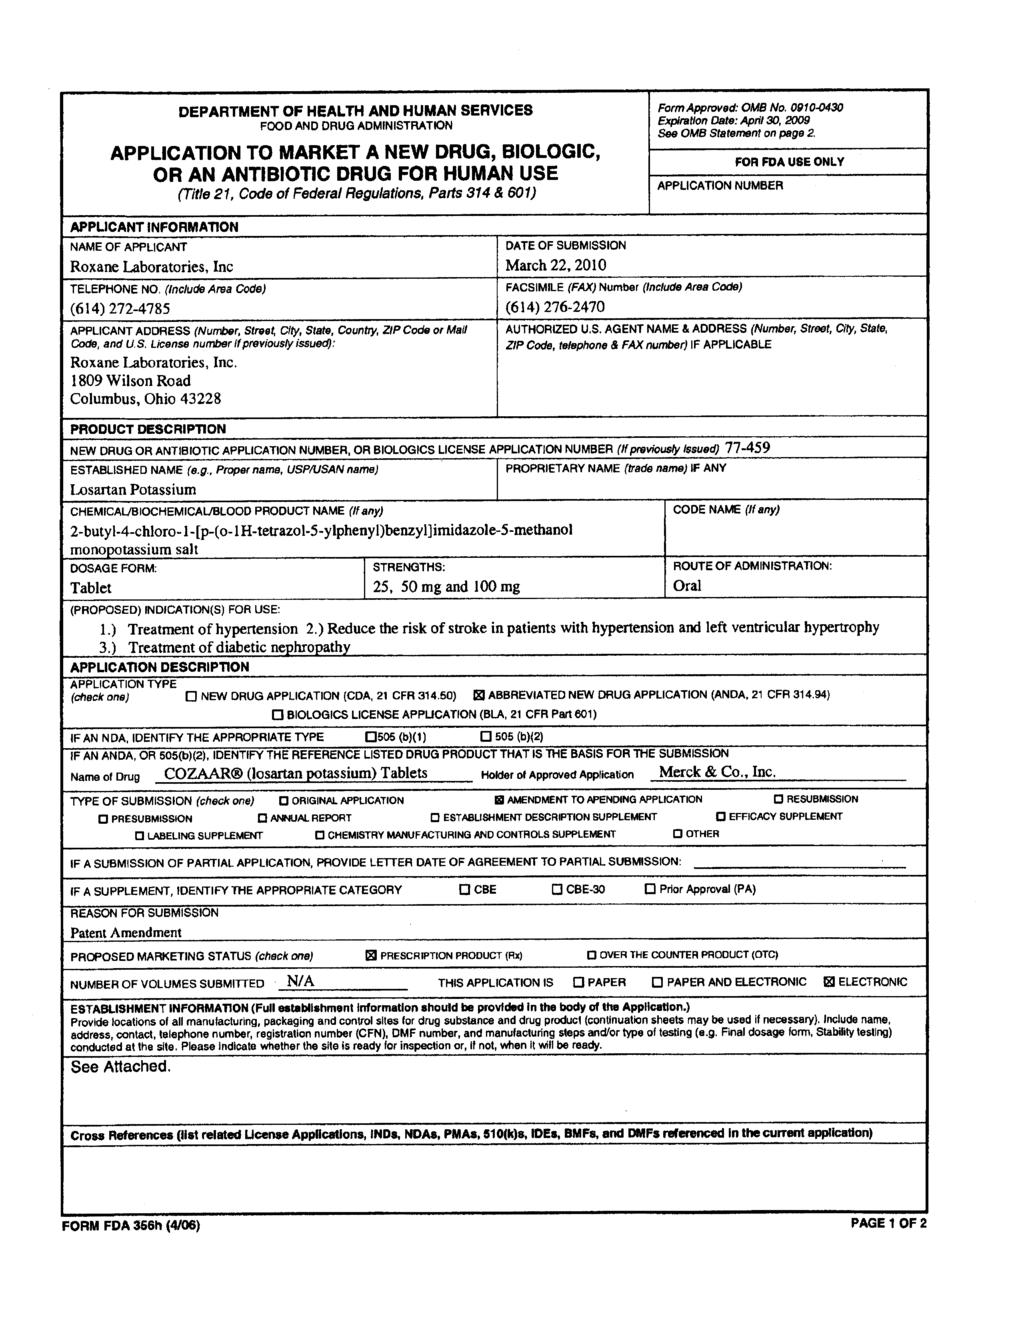 DEPARTMENT OF HEALTH AND HUMAN SERVICES Form Approved: 0MB No, 0910-0430 FOOD AND DRUG ADMINISTRATION Expiration Date: Aprrl 30, 2009 See 0MB Statement on page 2.